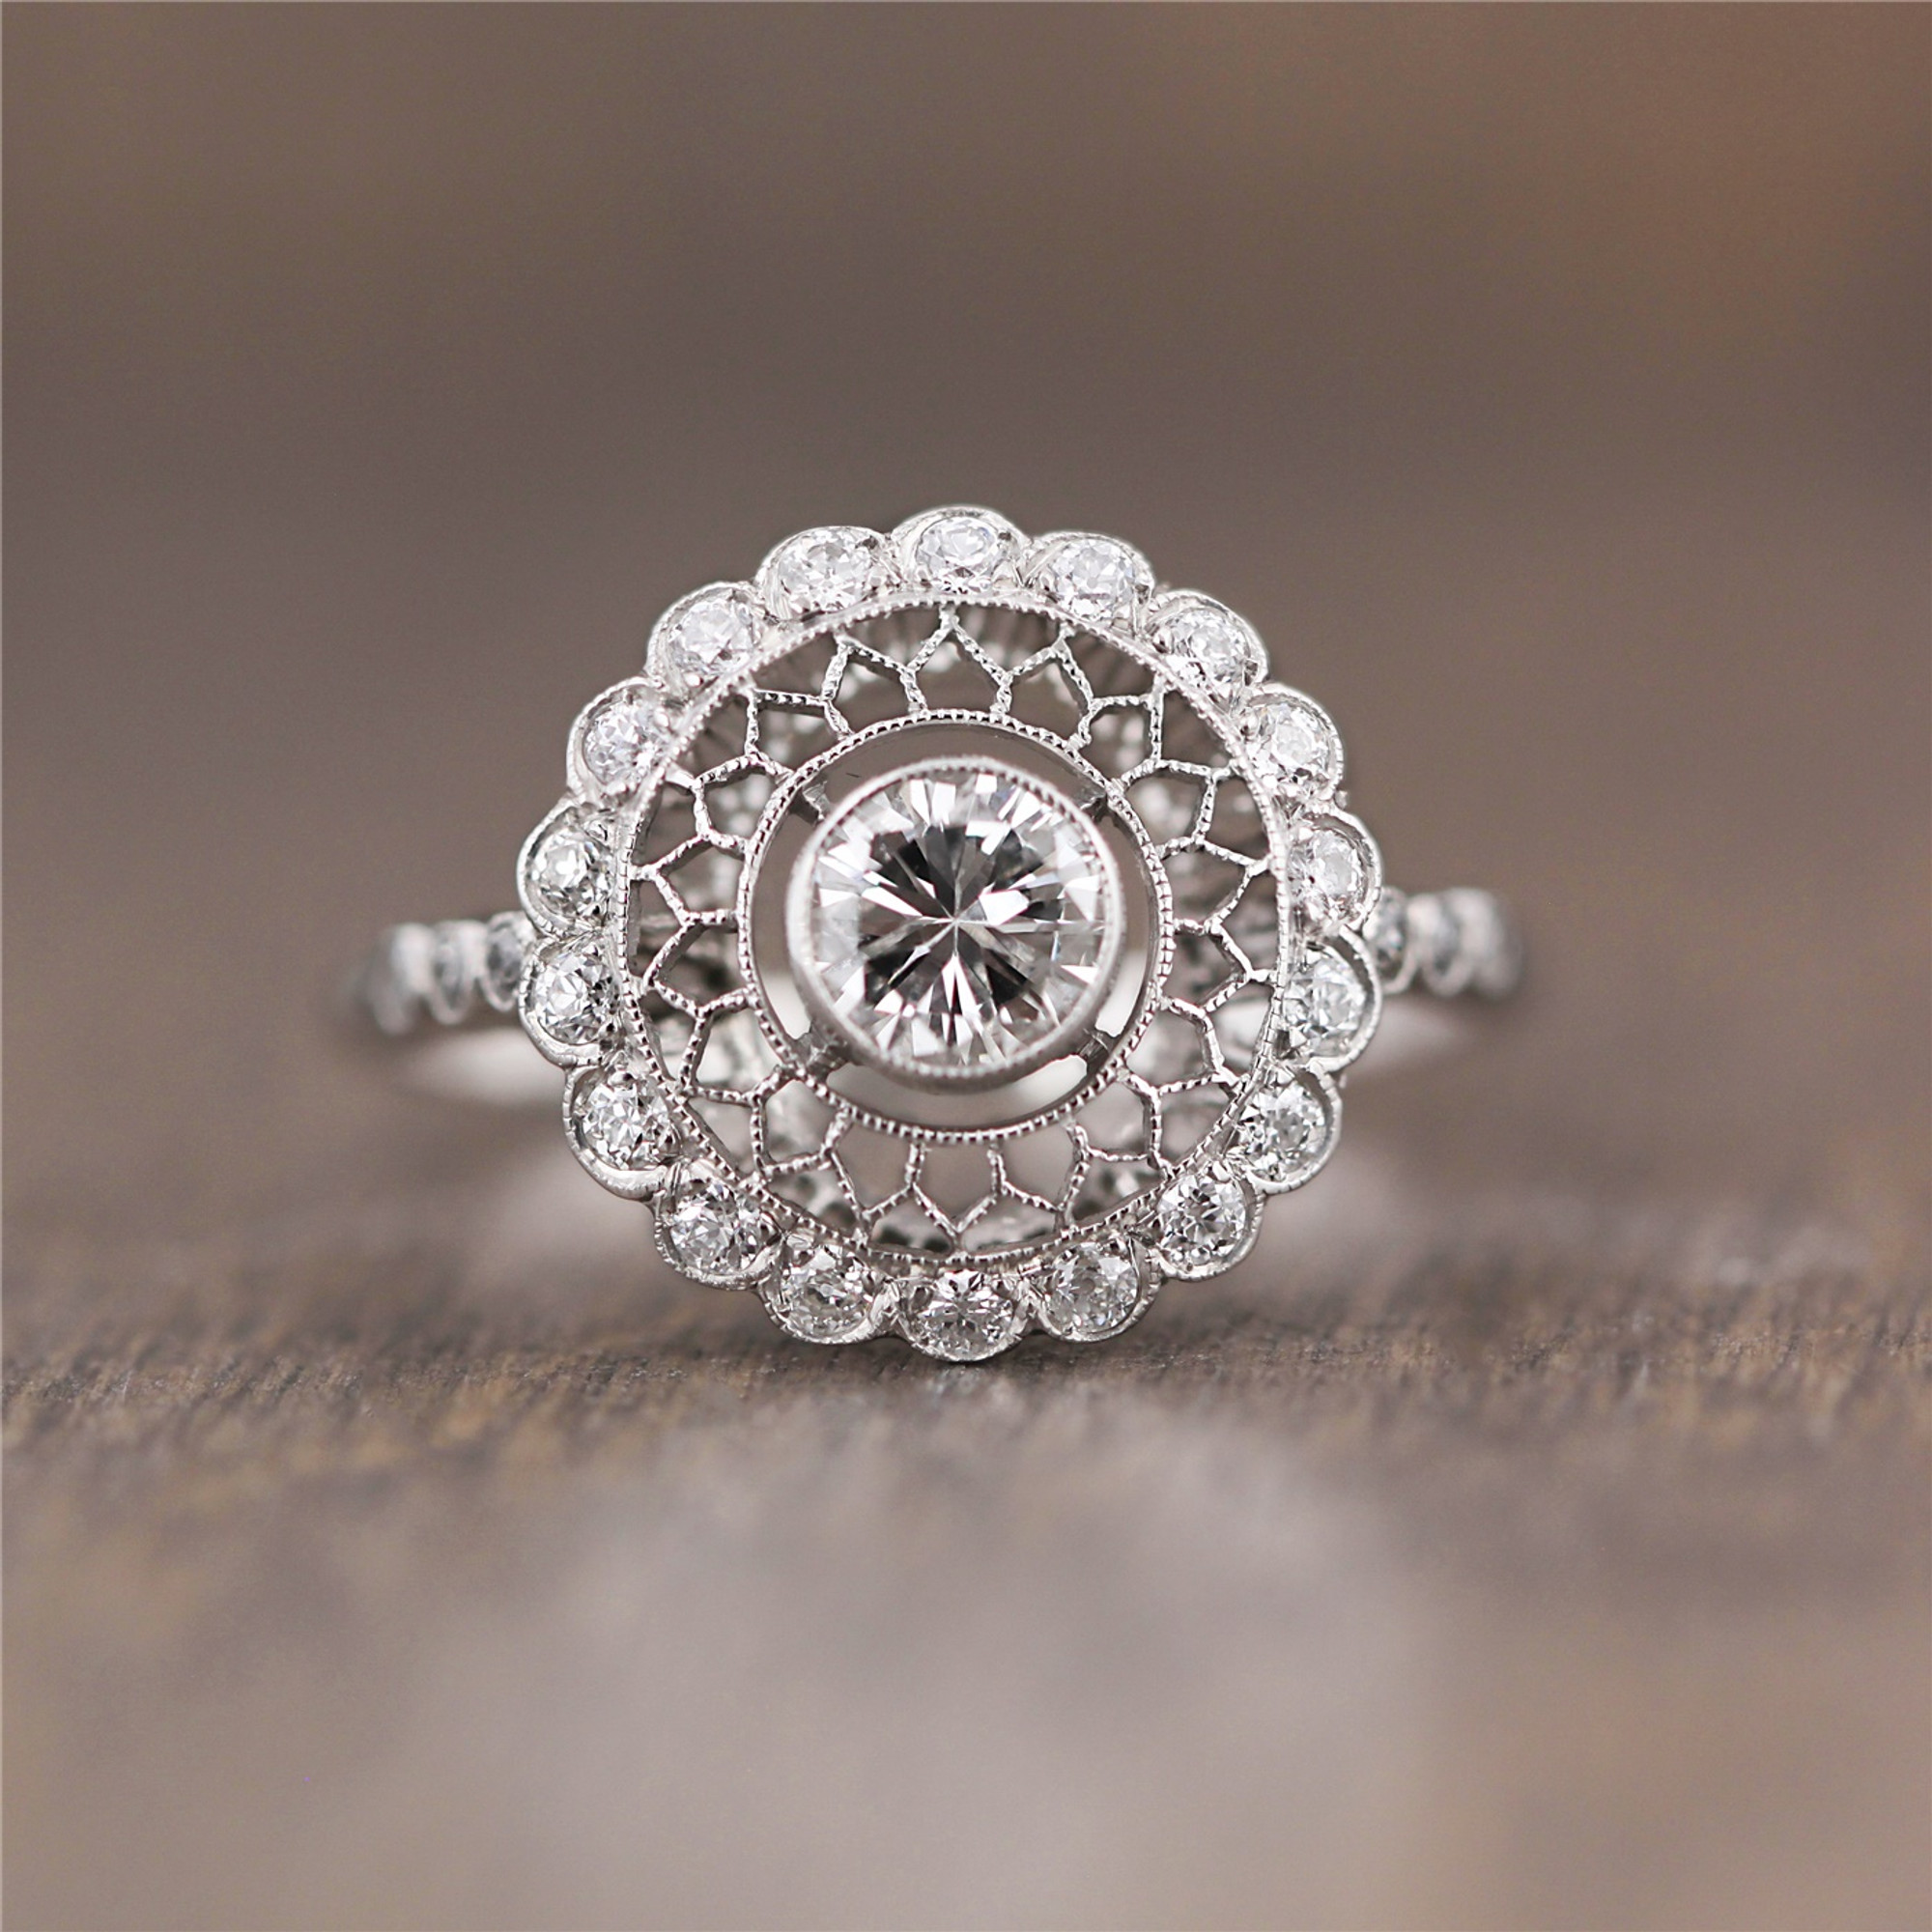 Cathedral Filigree diamond Engagement Ring In 14K White Gold | Fascinating  Diamonds